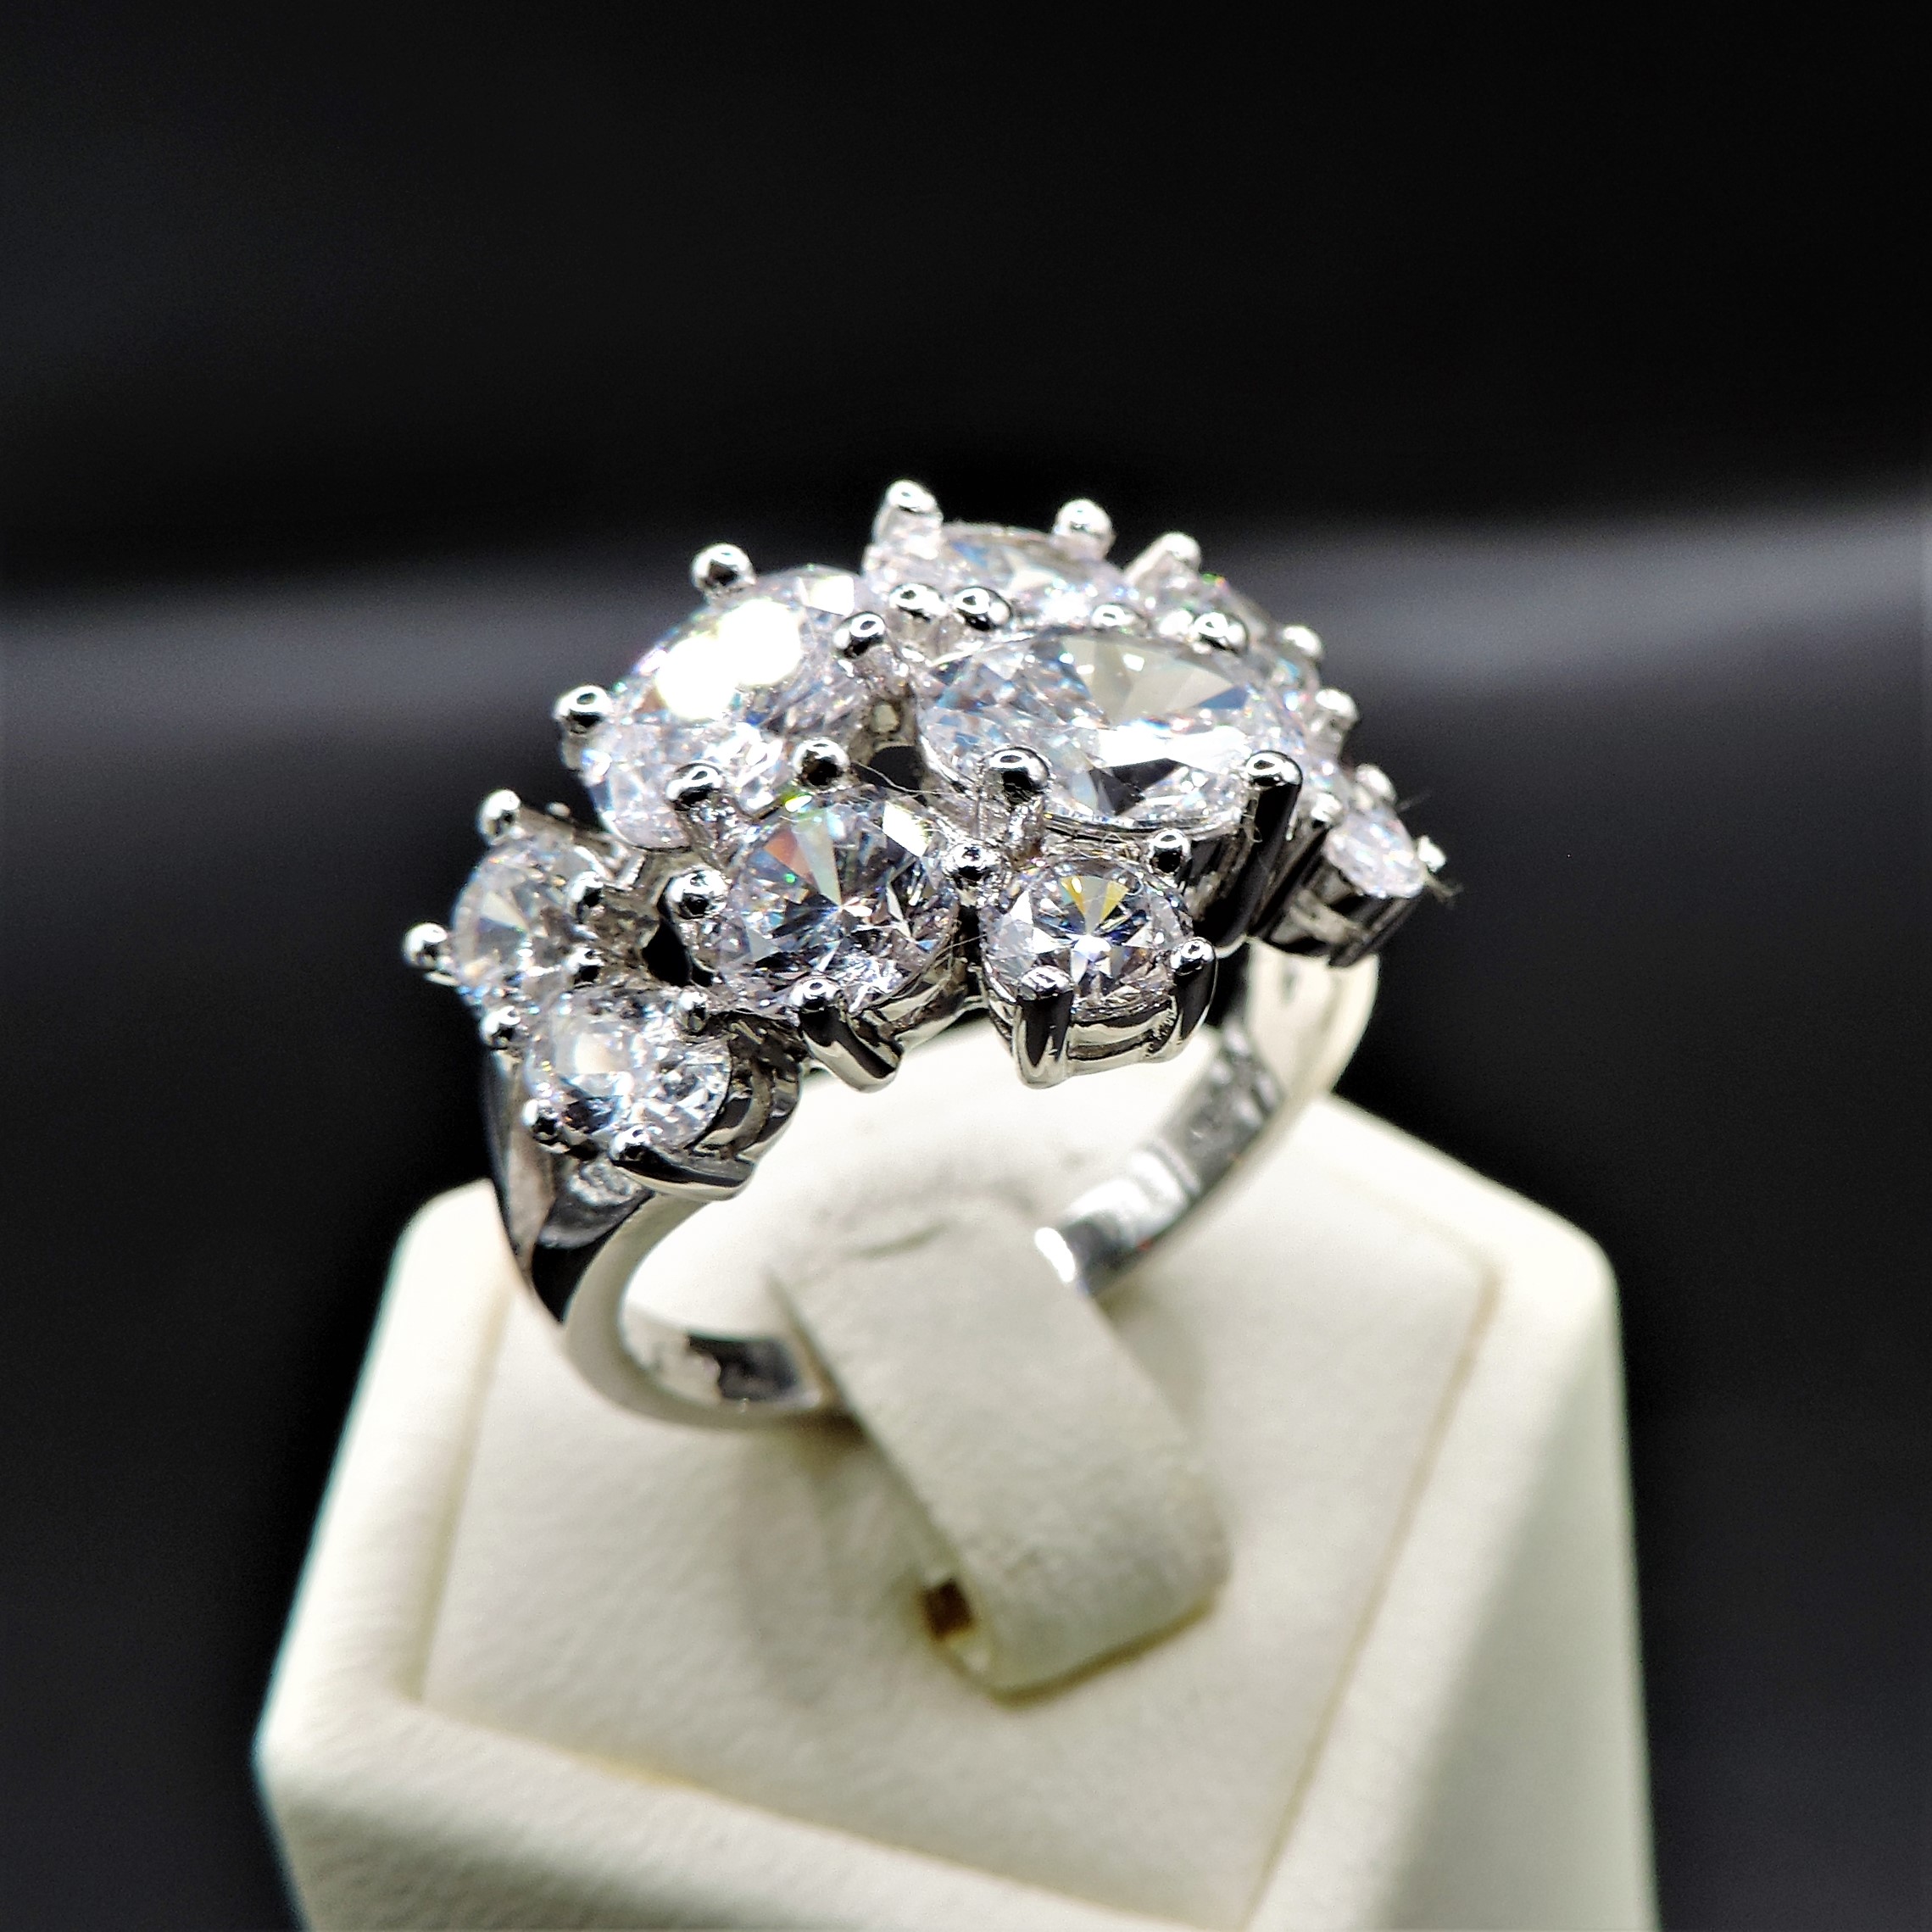 Sterling Silver 8CT 'Matara Diamond' Ring New' with Gift Pouch - Image 5 of 6